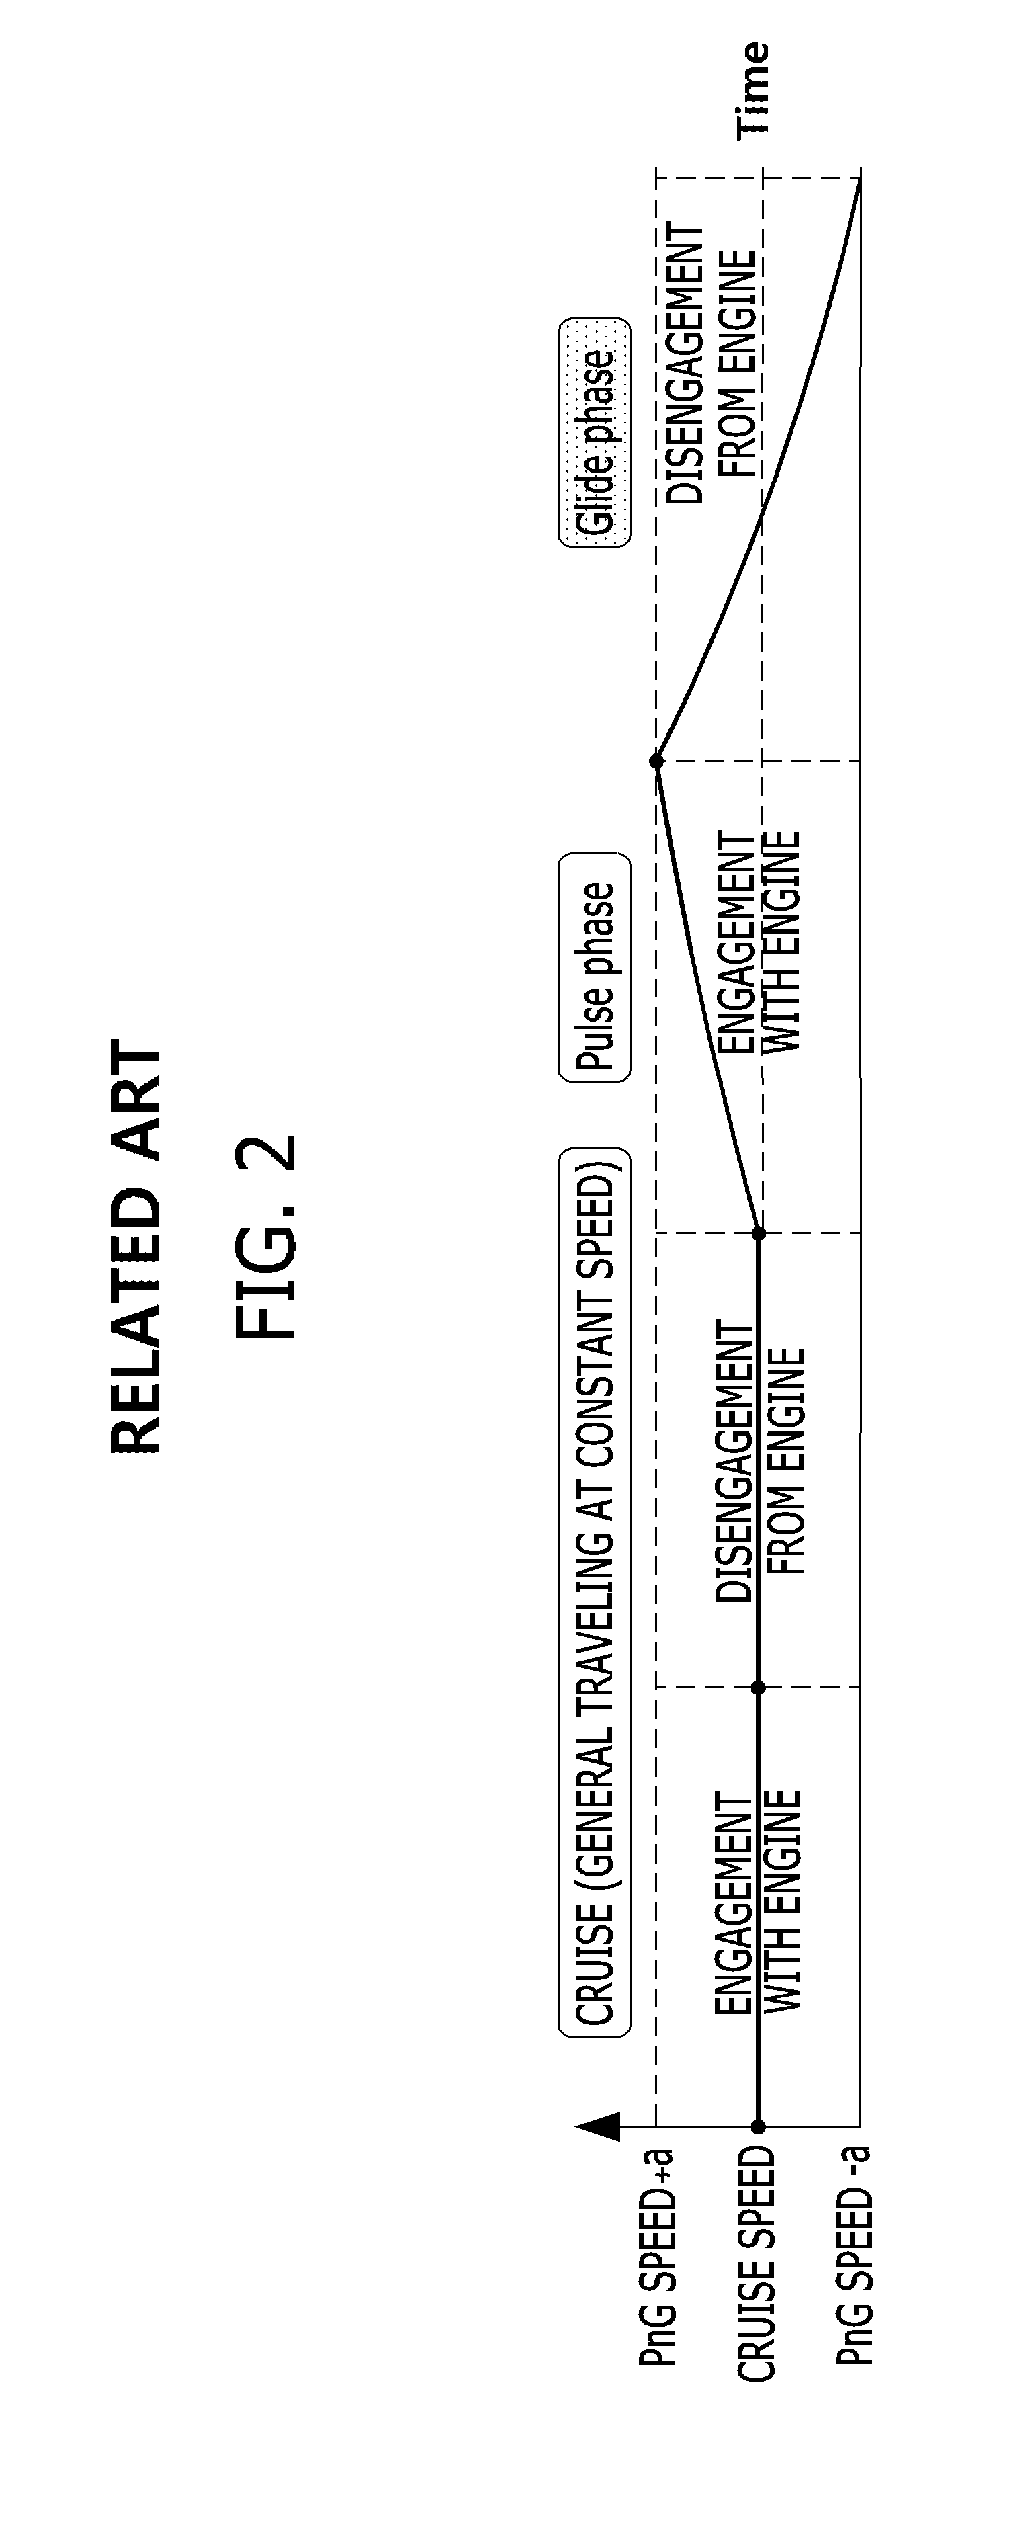 Hybrid electric vehicle and platooning control method therefor